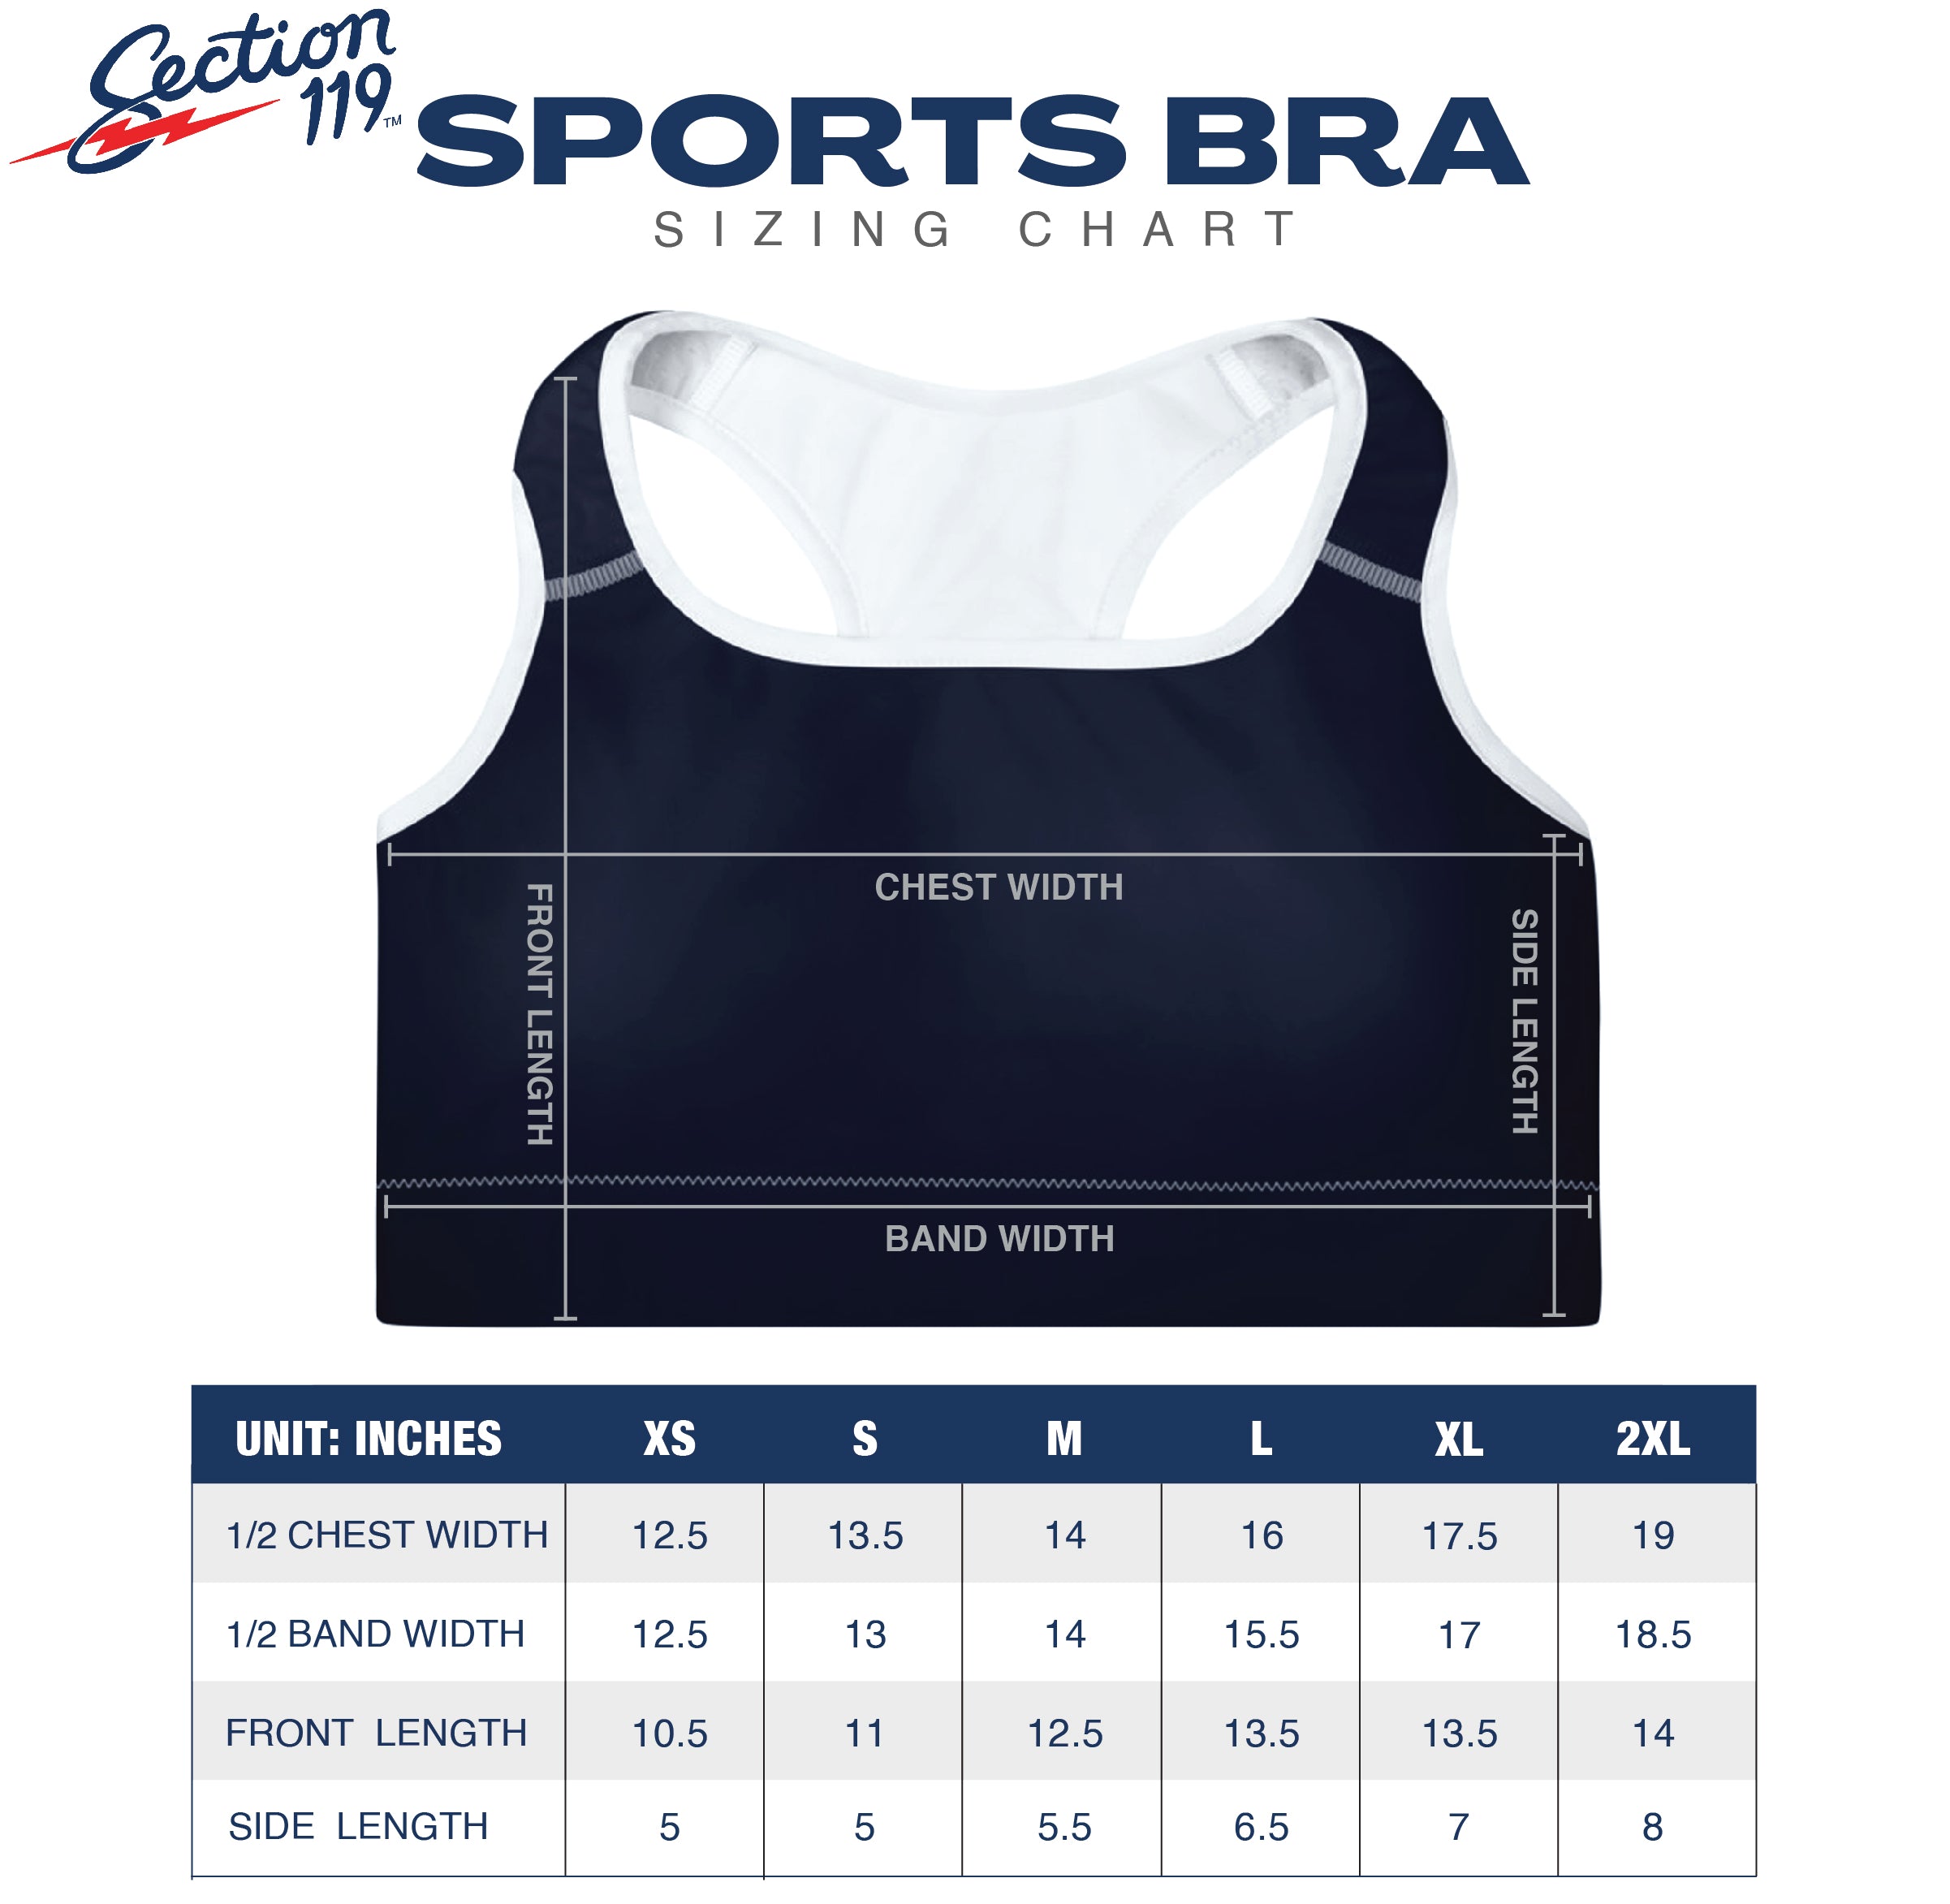 Red with Navy Donut Sports Bra - Section 119